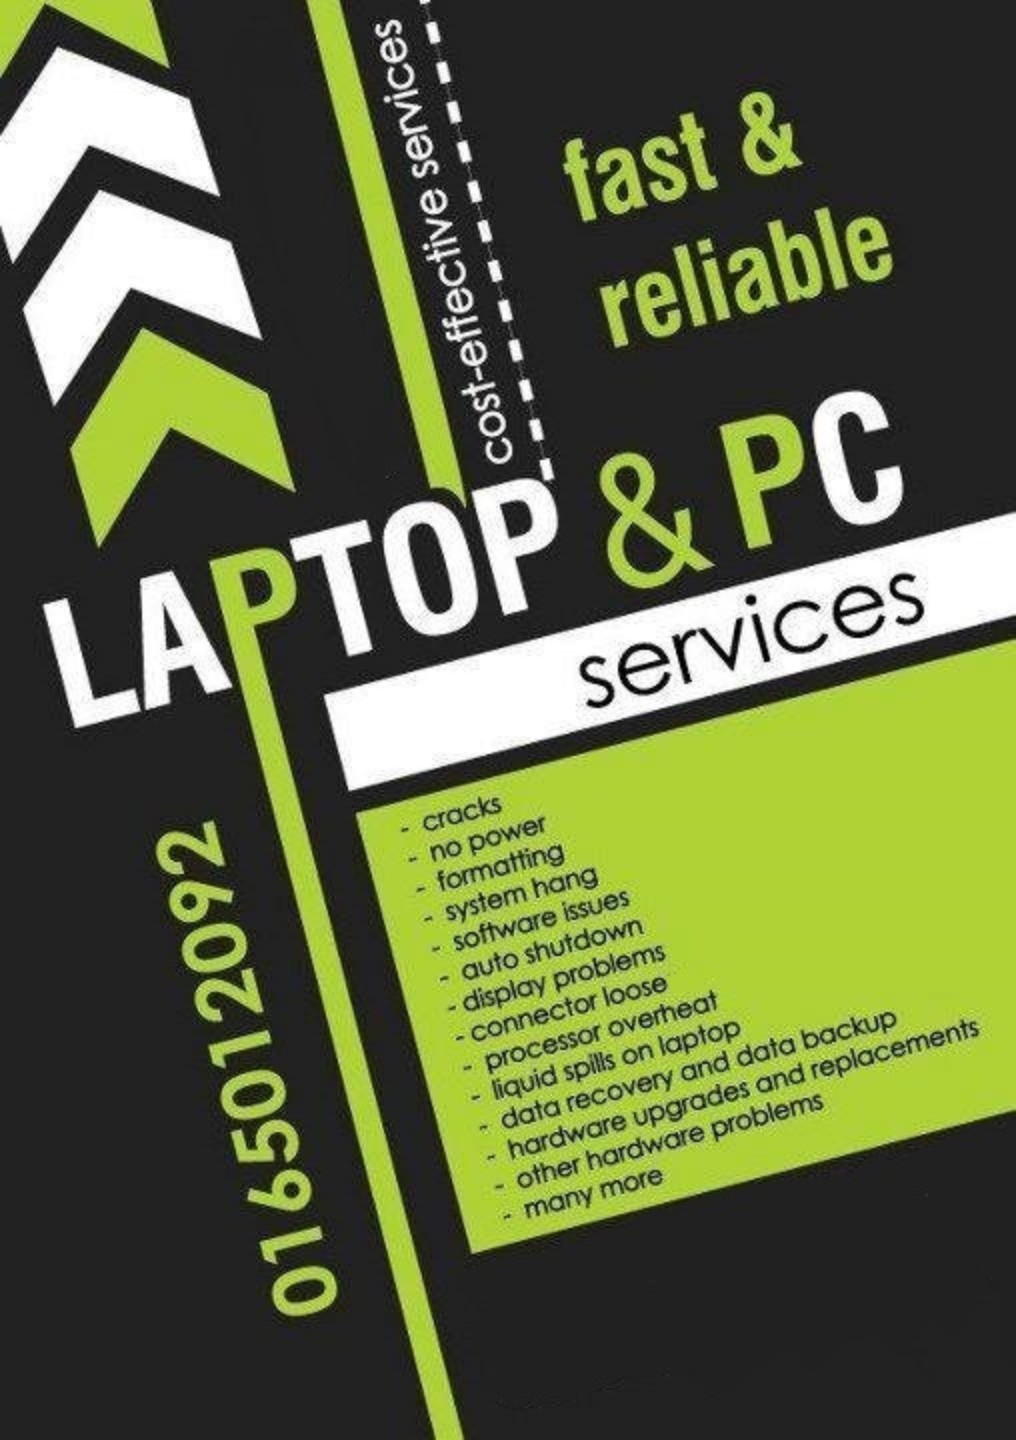 Laptop and PC Servicing